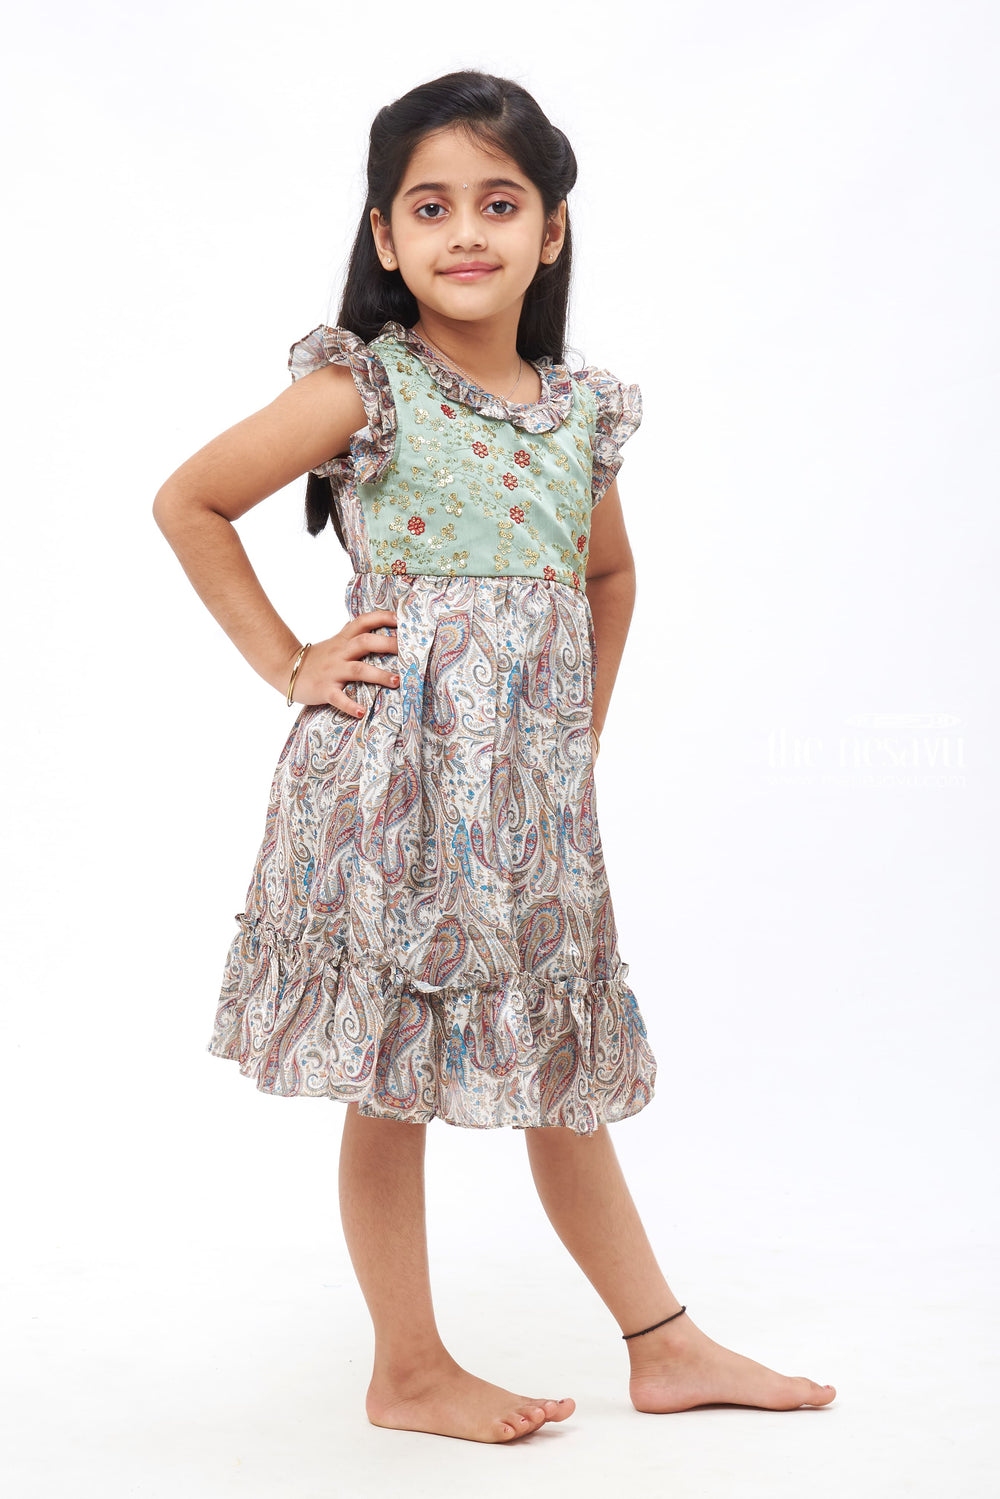 The Nesavu Girls Cotton Frock Elysian Paisley - Exquisite Sequin Embroidered Cotton Frock with Traditional Prints Nesavu The Beauty of Simplicity | Timeless Cotton Frocks for Girls | The Nesavu